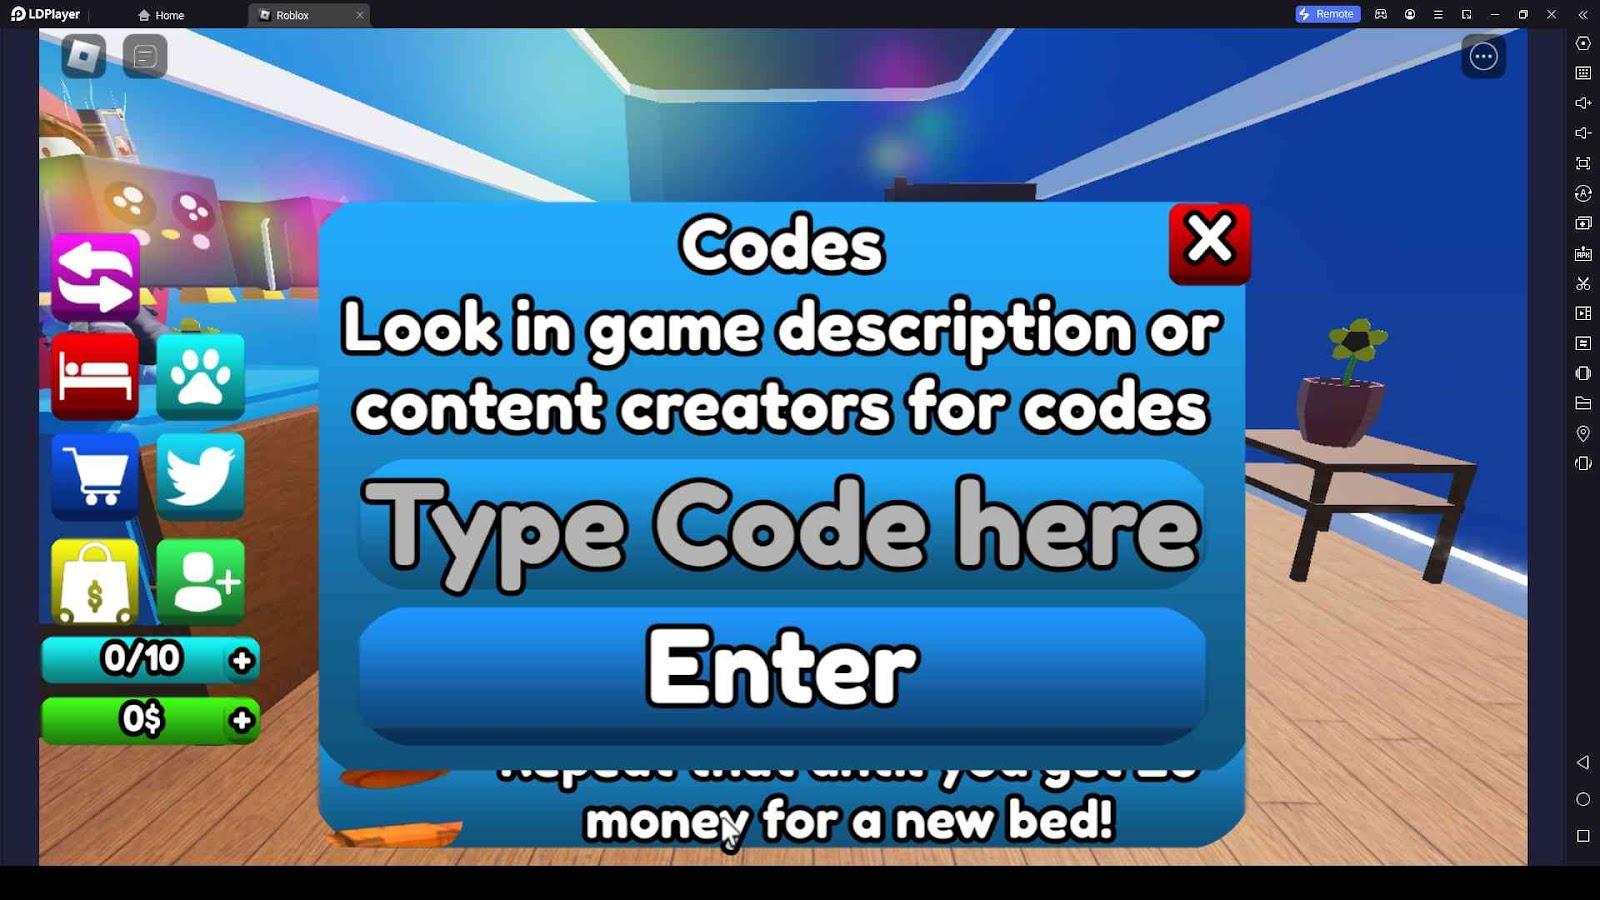 Roblox Dreaming Simulator Codes Unlock Your Dreaming Potential March